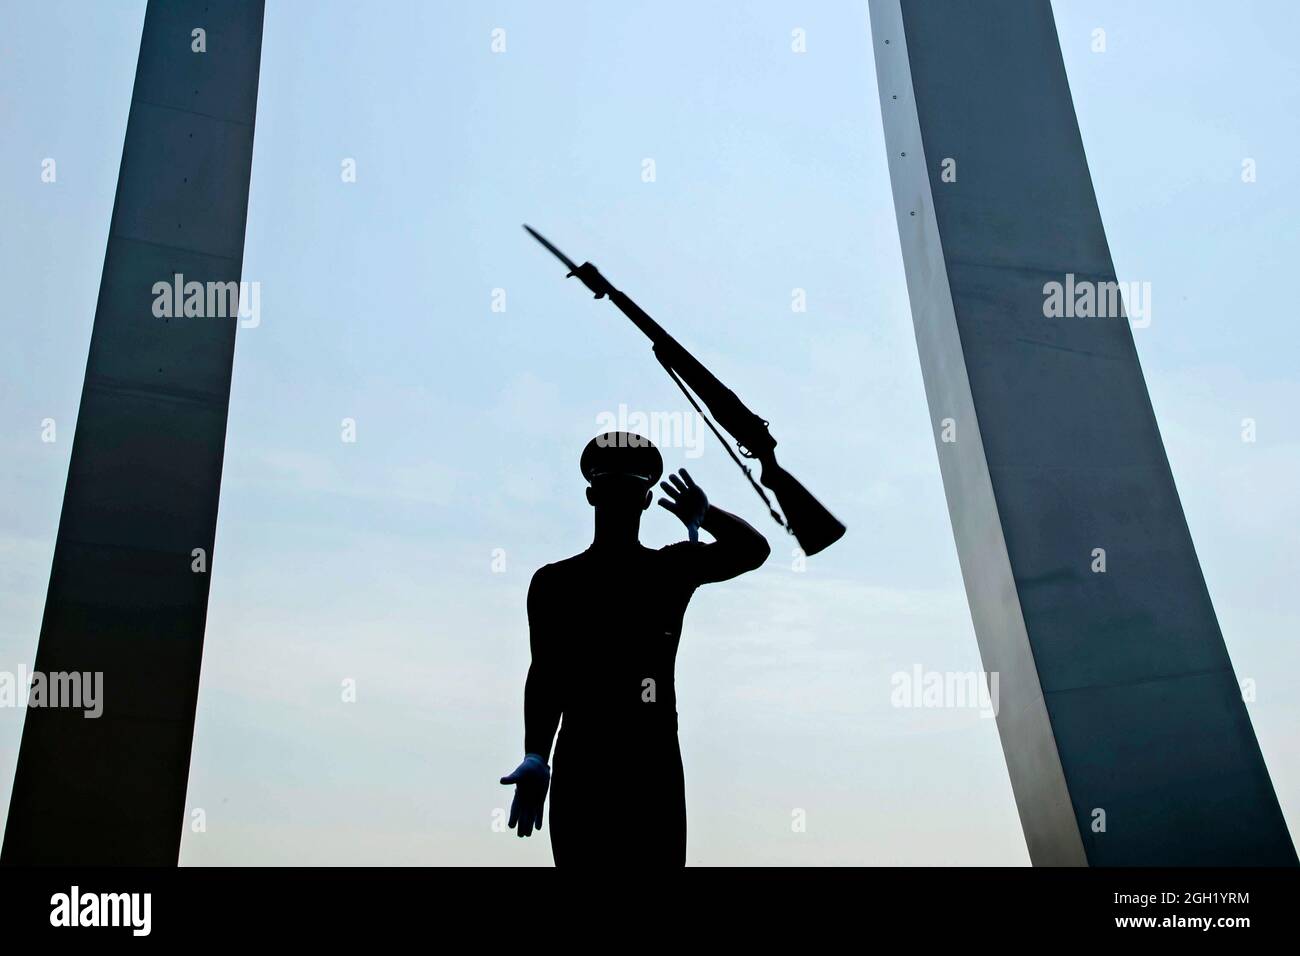 U.S. Air Force Airman 1st Class Jordan Shields of the Air Force Honor Guard drill team warms up prior to a performance at the Air Force Memorial, Arli Stock Photo